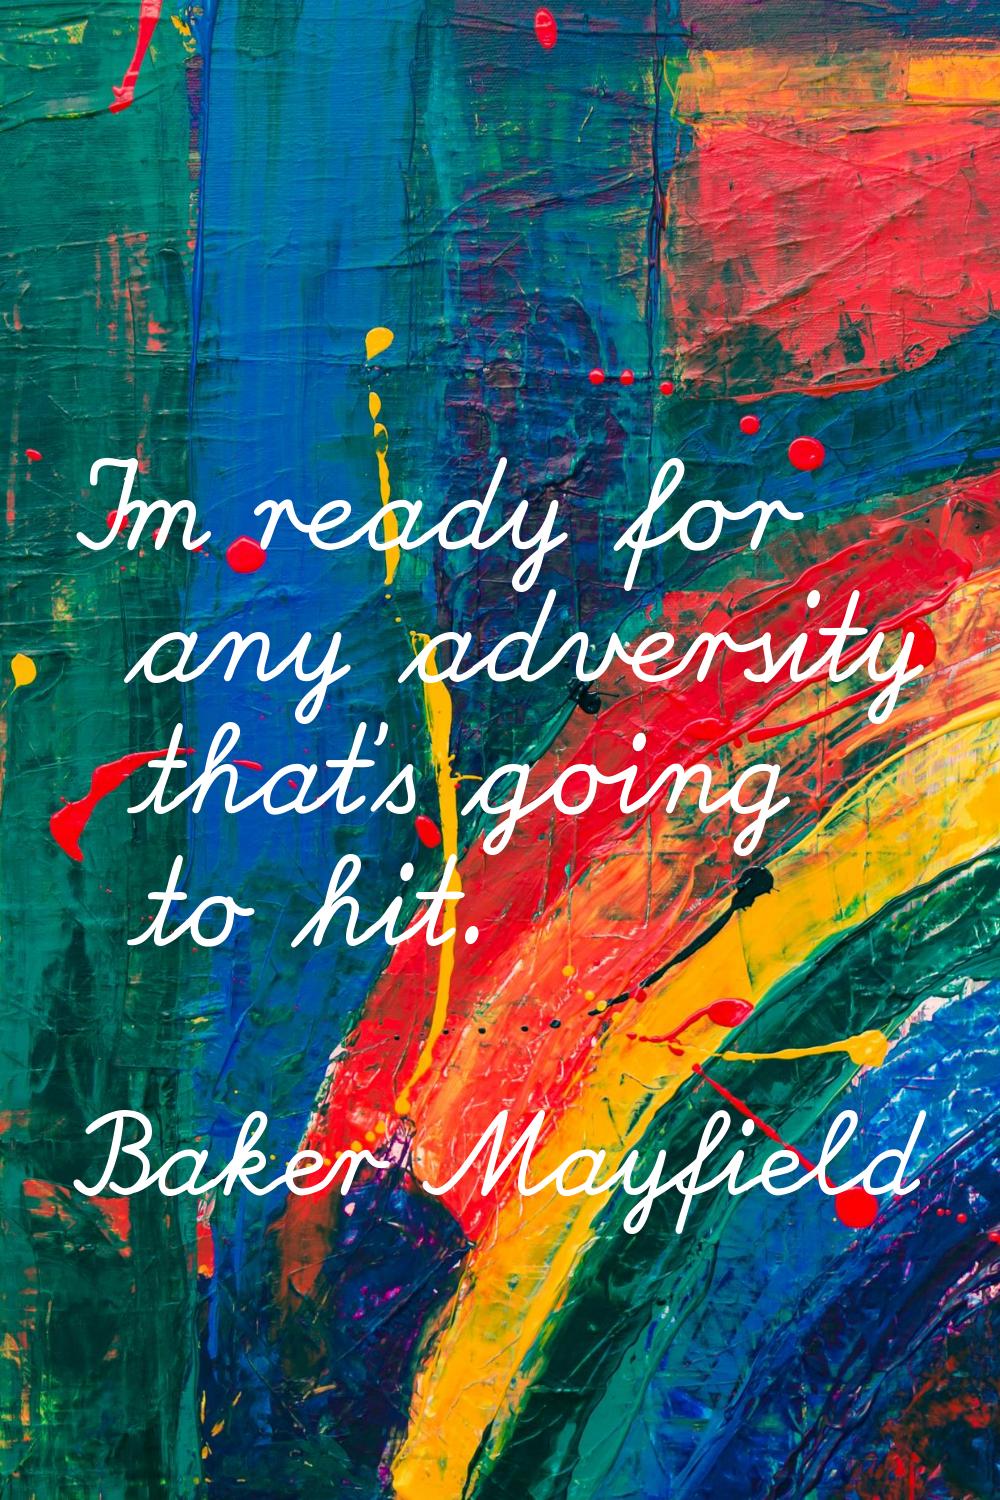 I'm ready for any adversity that's going to hit.